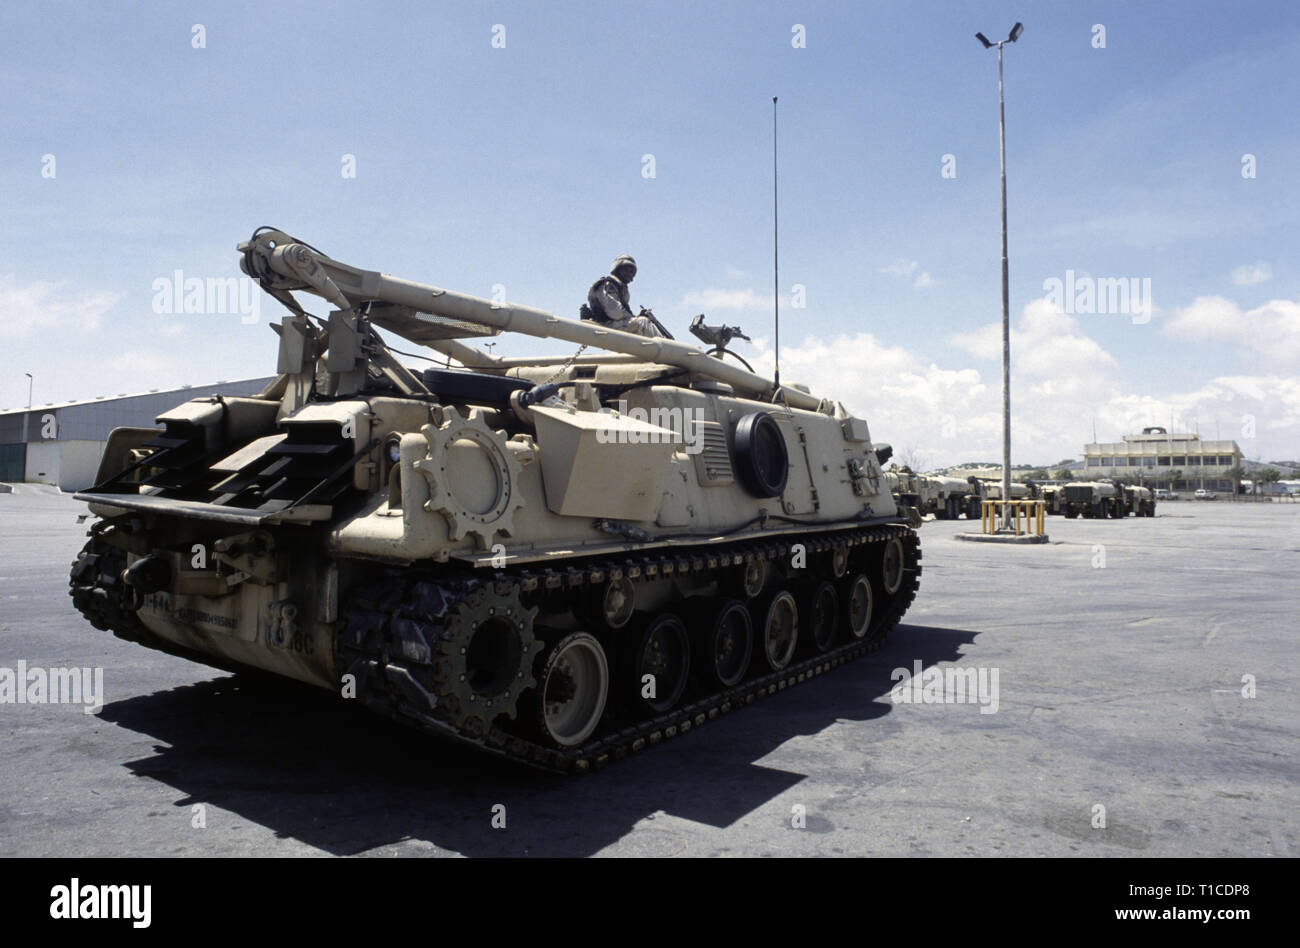 29th October 1993 A U.S. Army soldier of the 24th Infantry Division, 1st Battalion of the 64th Armored Regiment, sits on top of his M88 recovery vehicle, in the port in Mogadishu, Somalia where it has just arrived by sea. Stock Photo